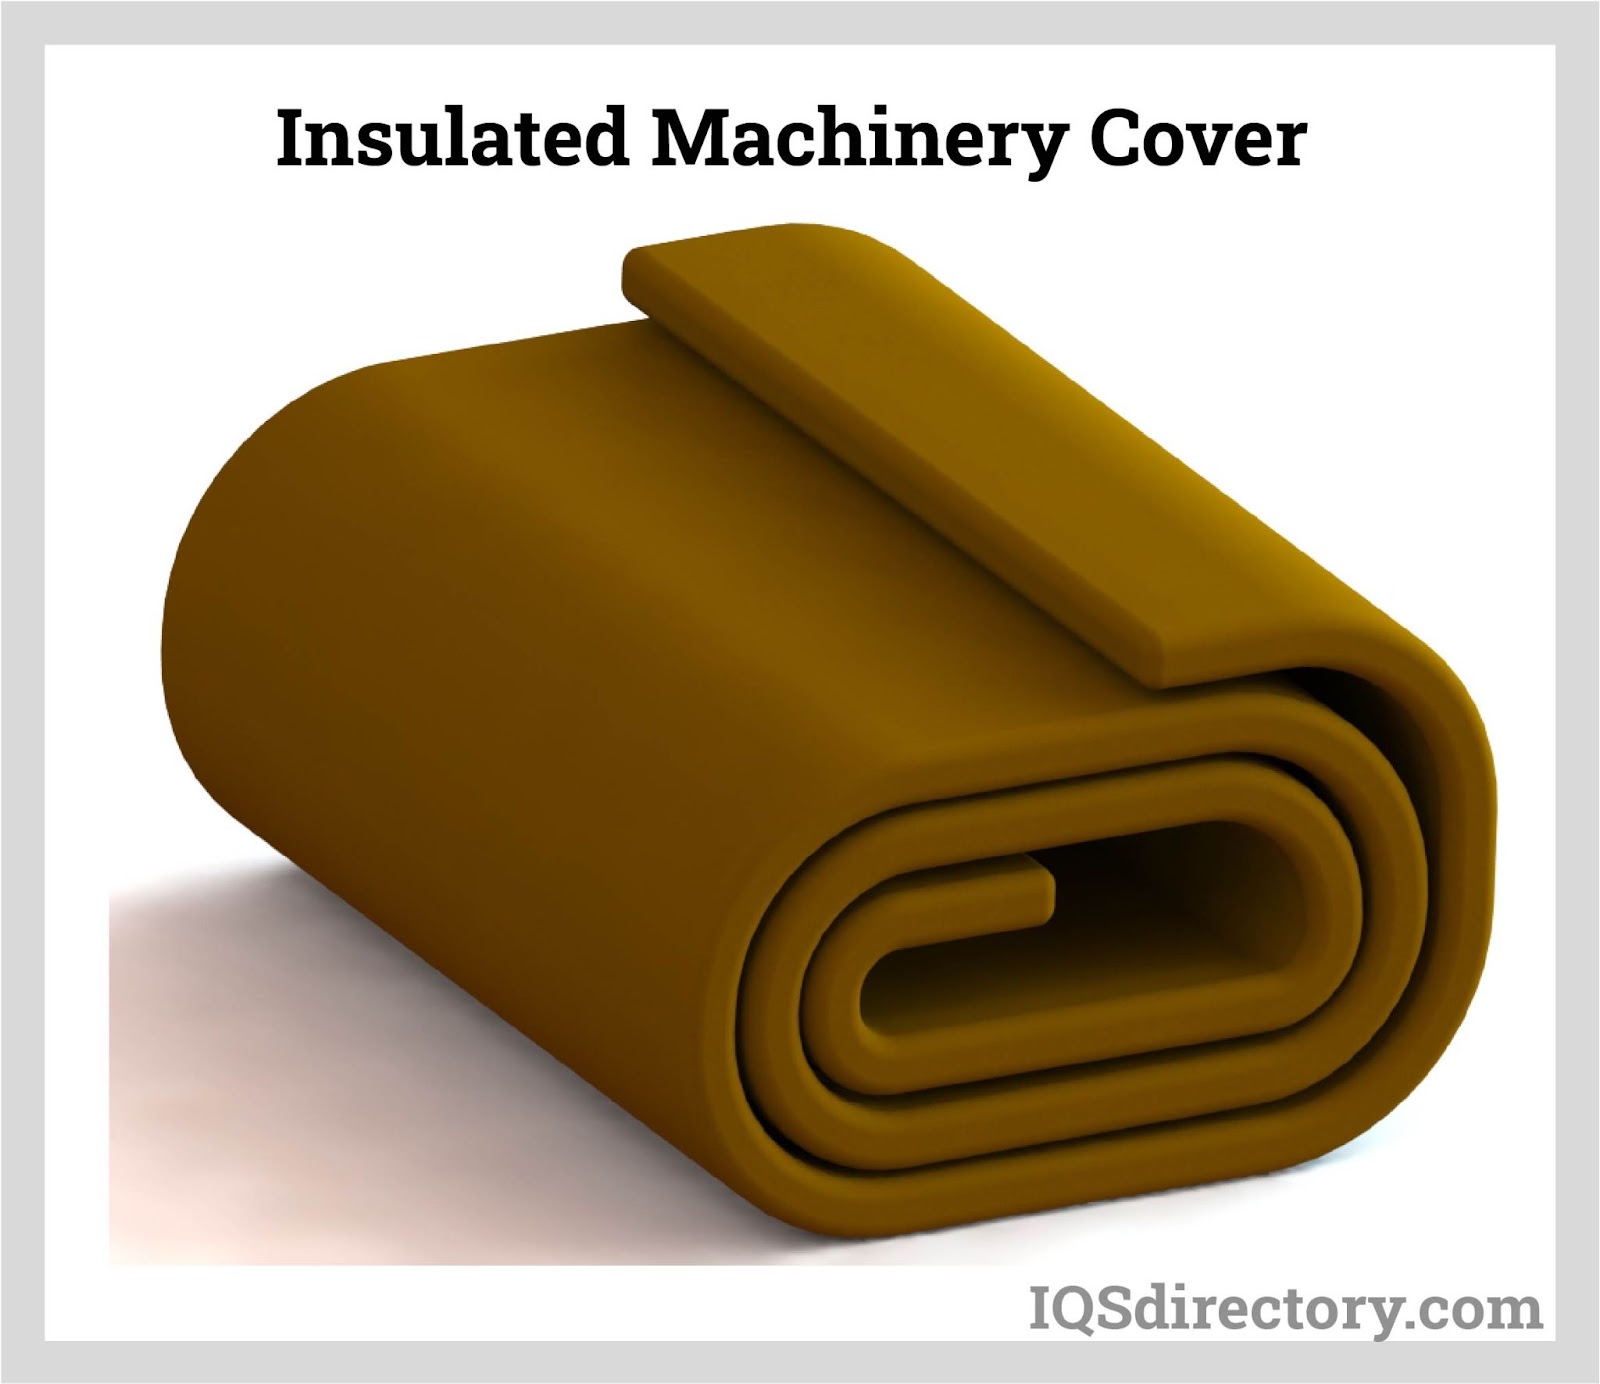 Insulated Machinery Cover